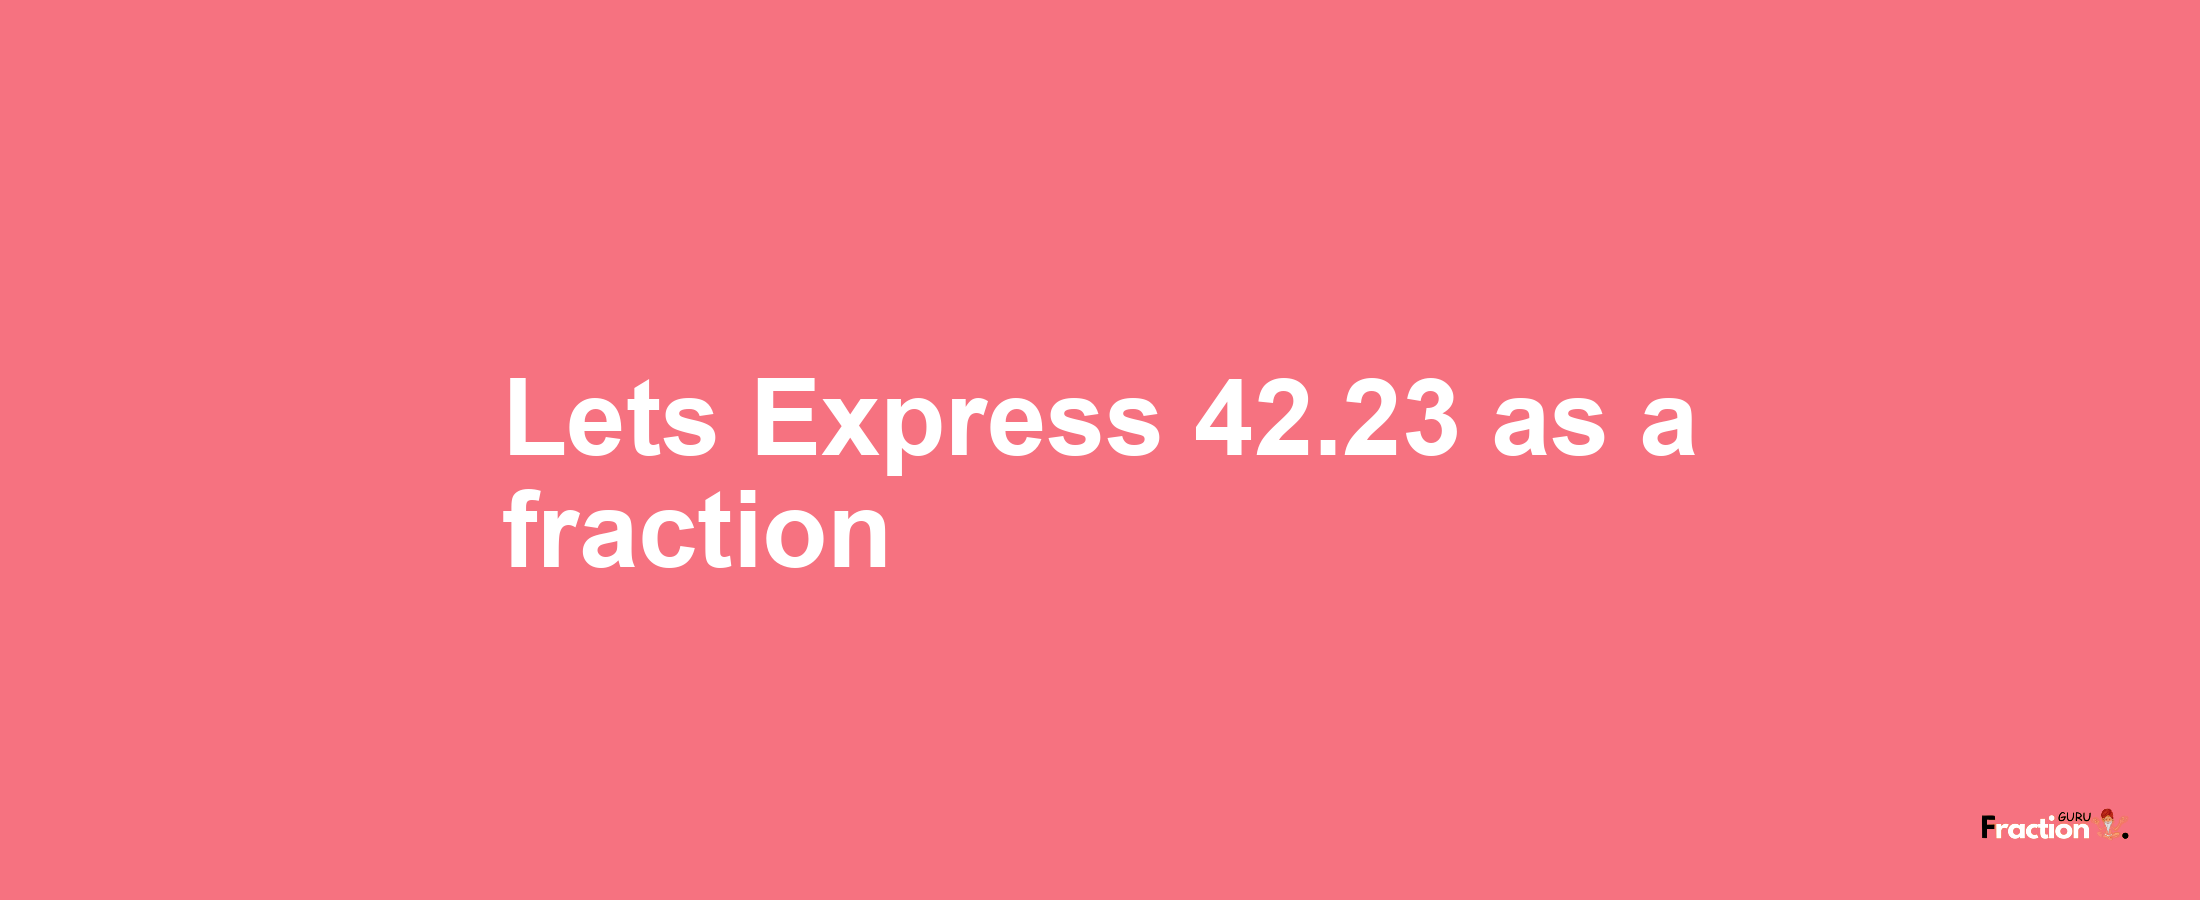 Lets Express 42.23 as afraction